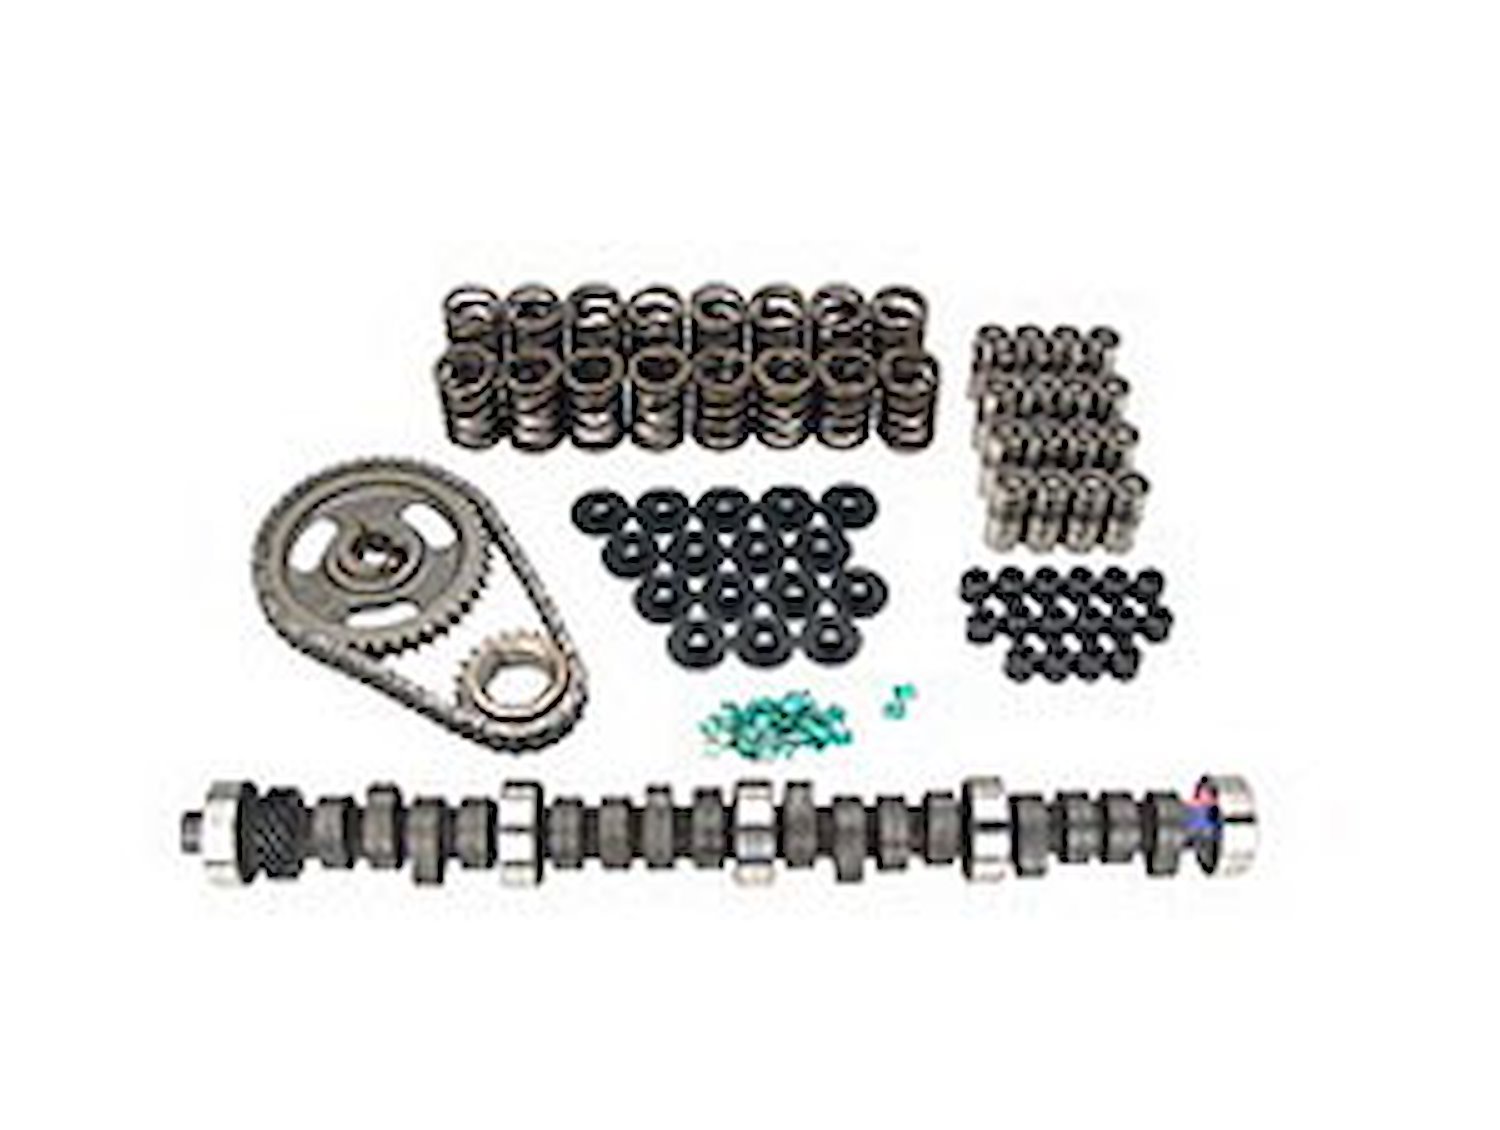 Xtreme Energy 262H Hydraulic Flat Tappet Camshaft Complete Kit Lift .513"/.520" Duration 262°/270° RPM Range 1400-5600